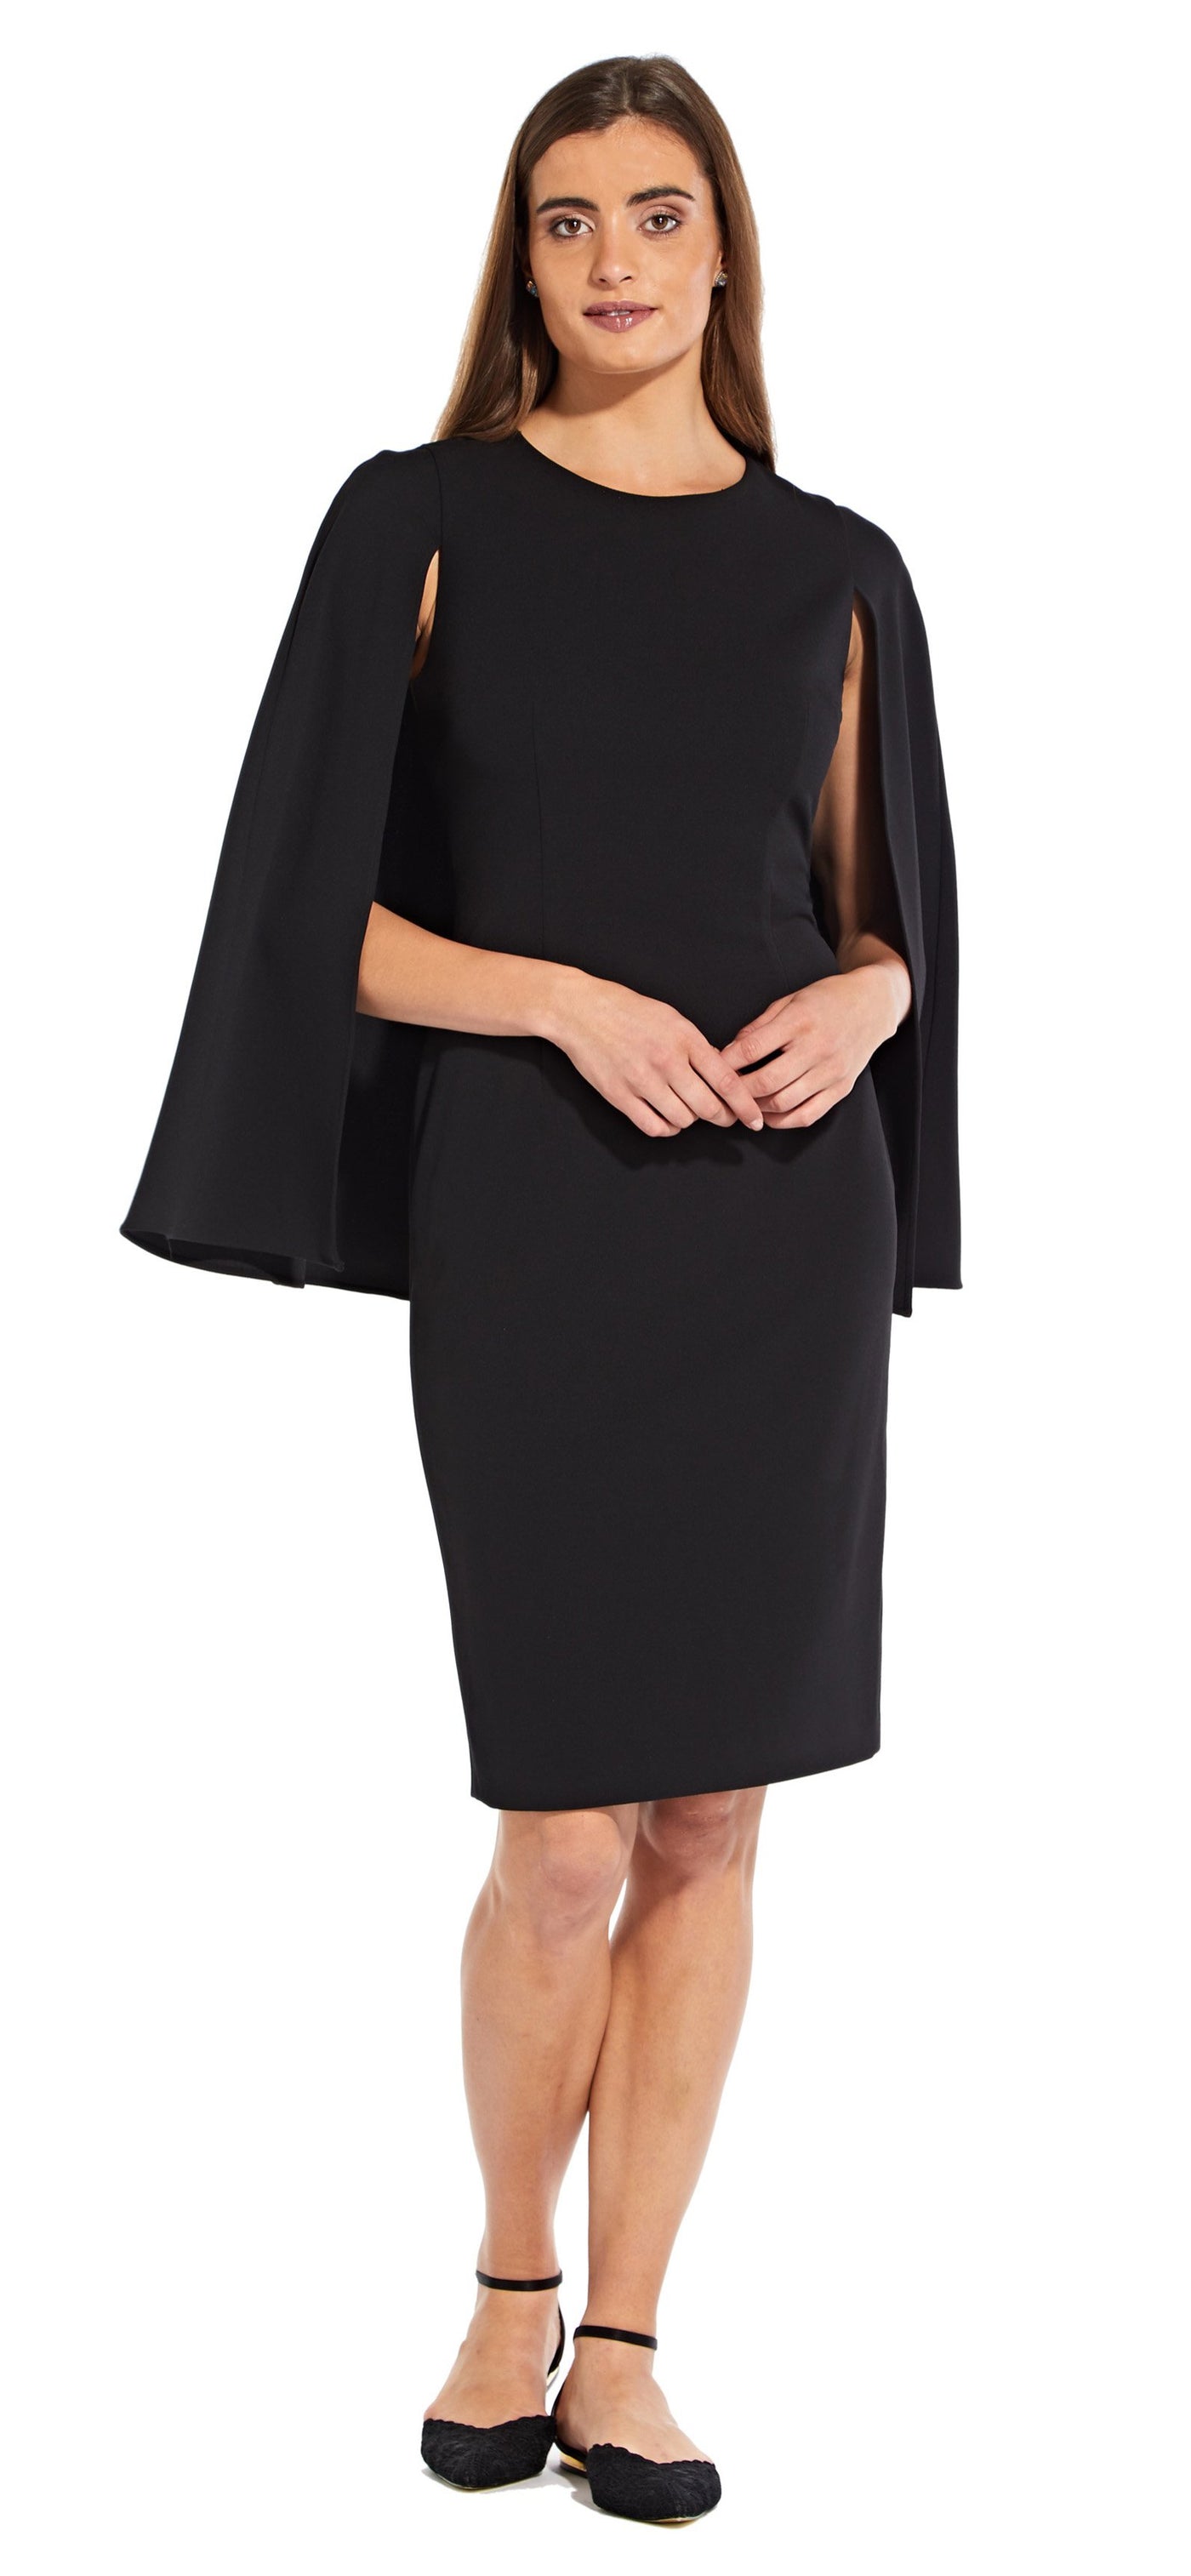 Adrianna Papell - AP1D103195 Jewel Cape Sleeve Cocktail Dress In Black